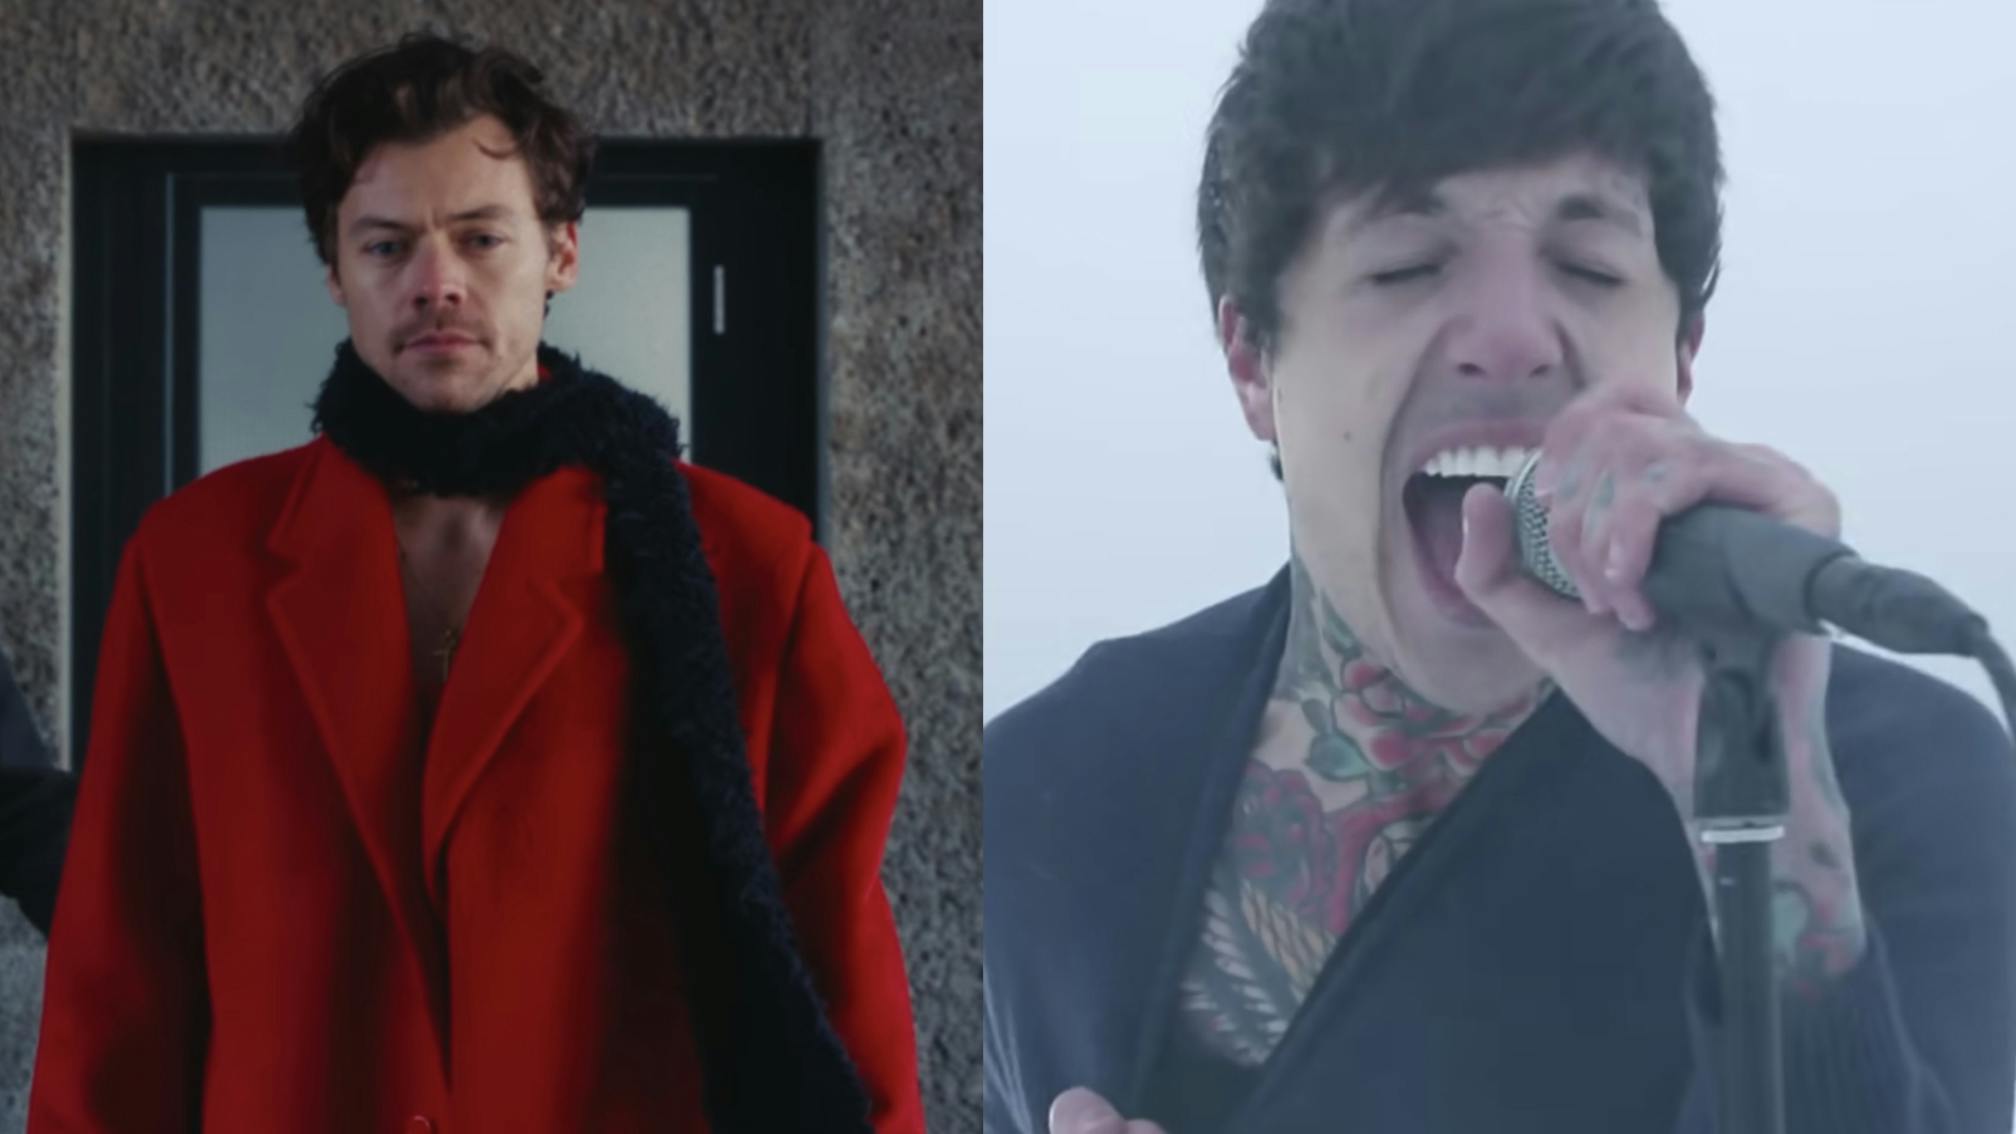 Listen: Harry Styles’ As It Was in the style of Bring Me The Horizon